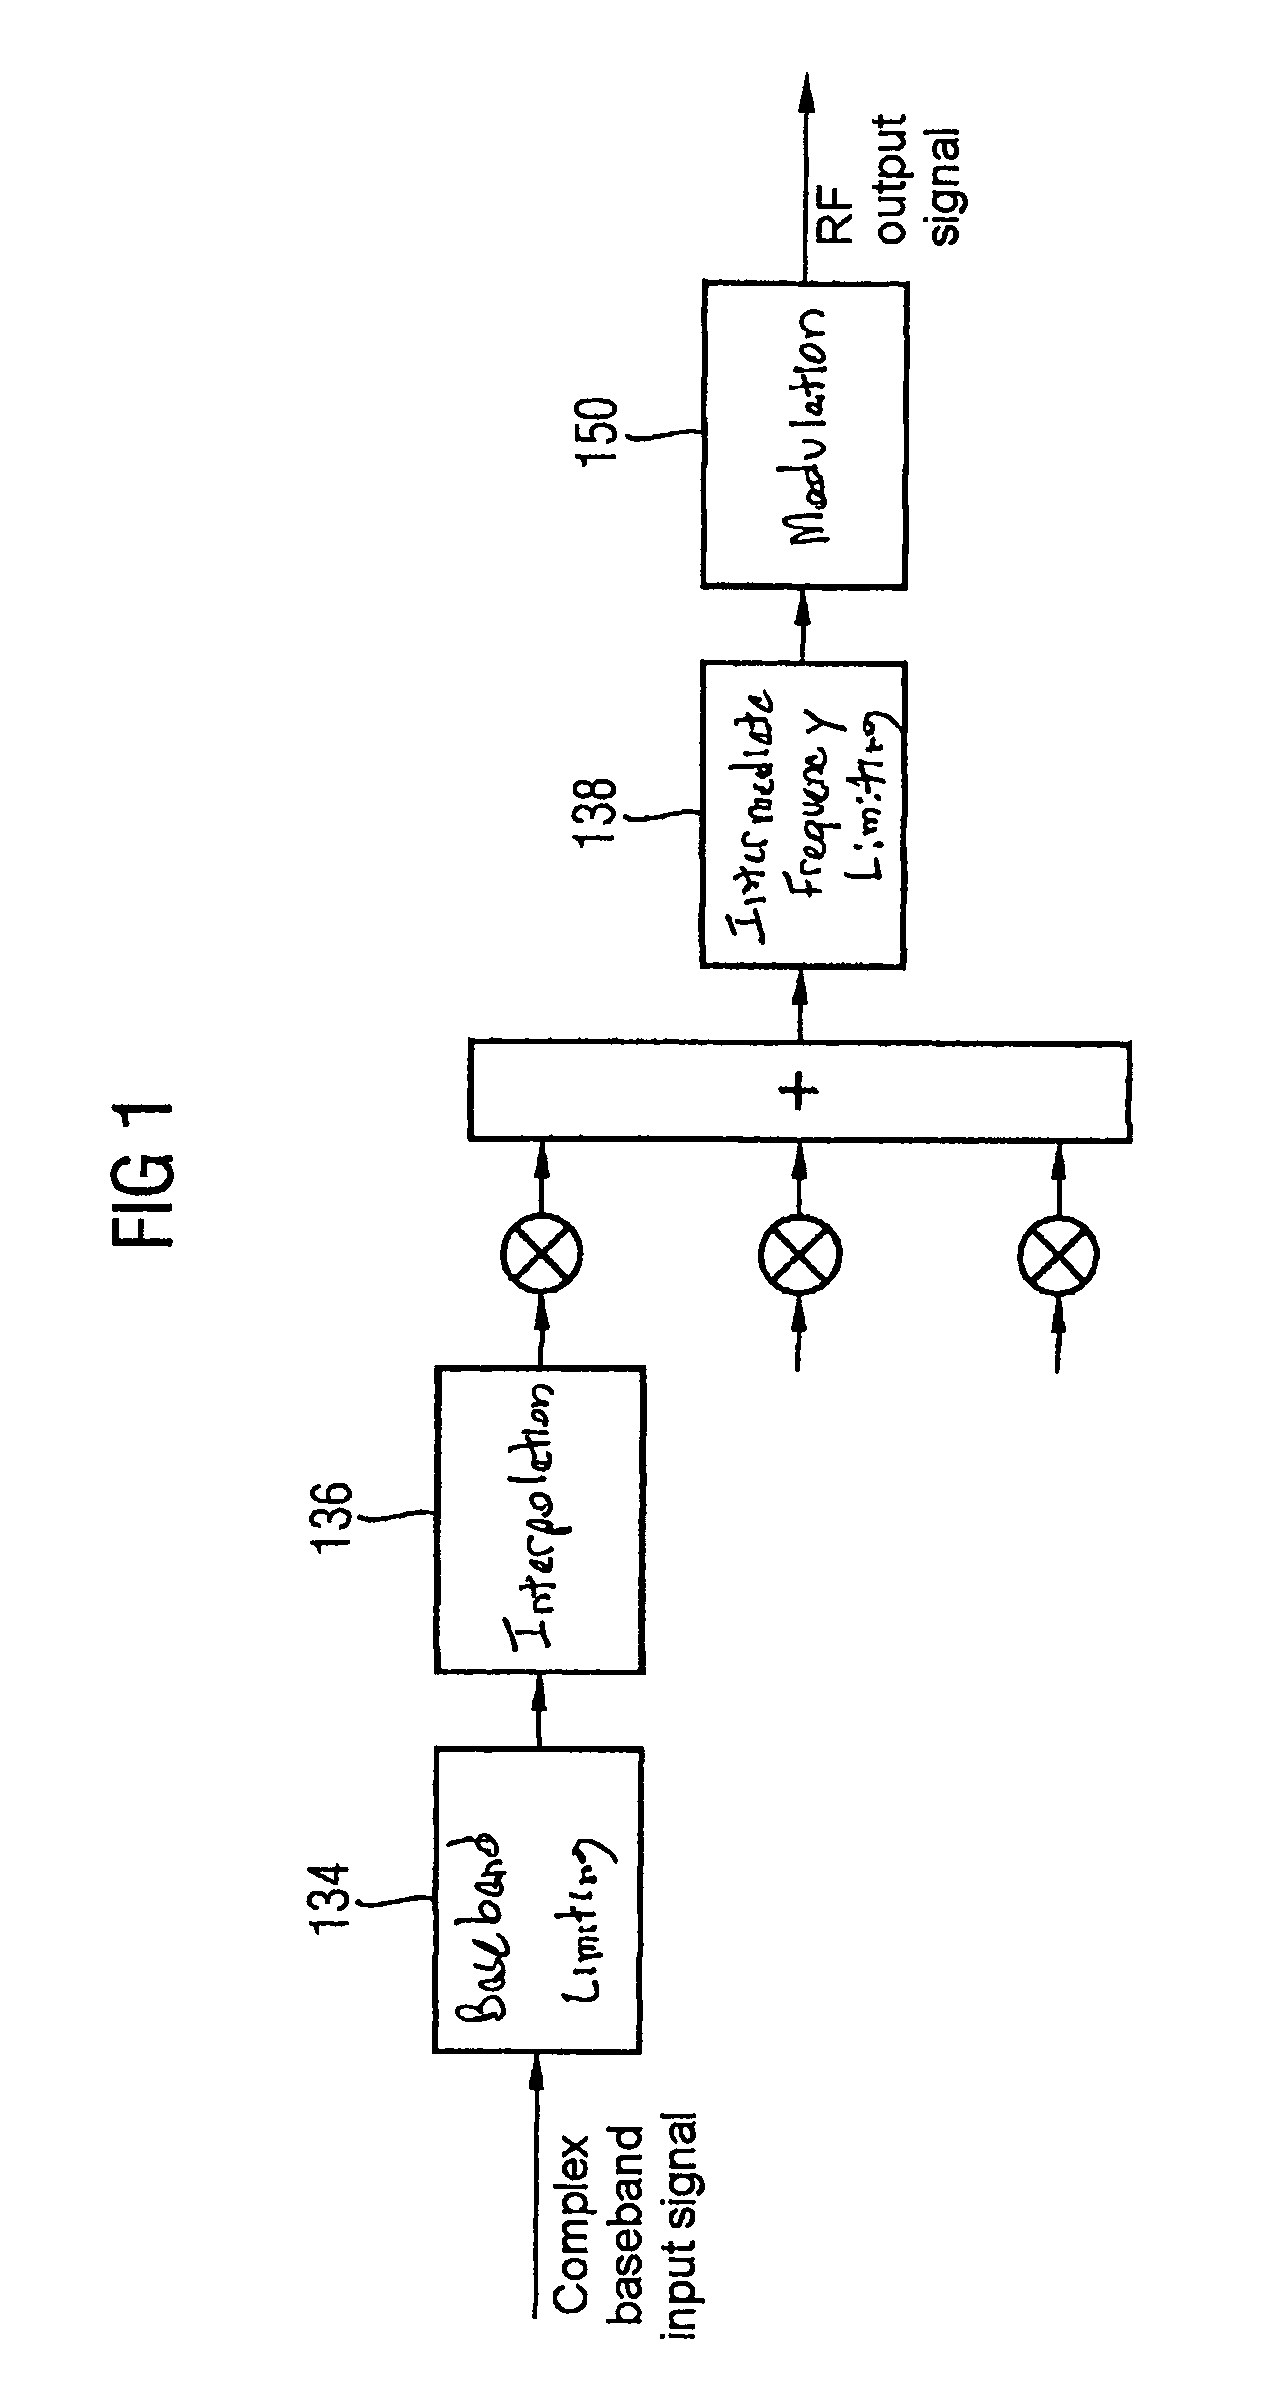 Apparatus and method for producing a signal to reduce the PAR in a multicarrier system